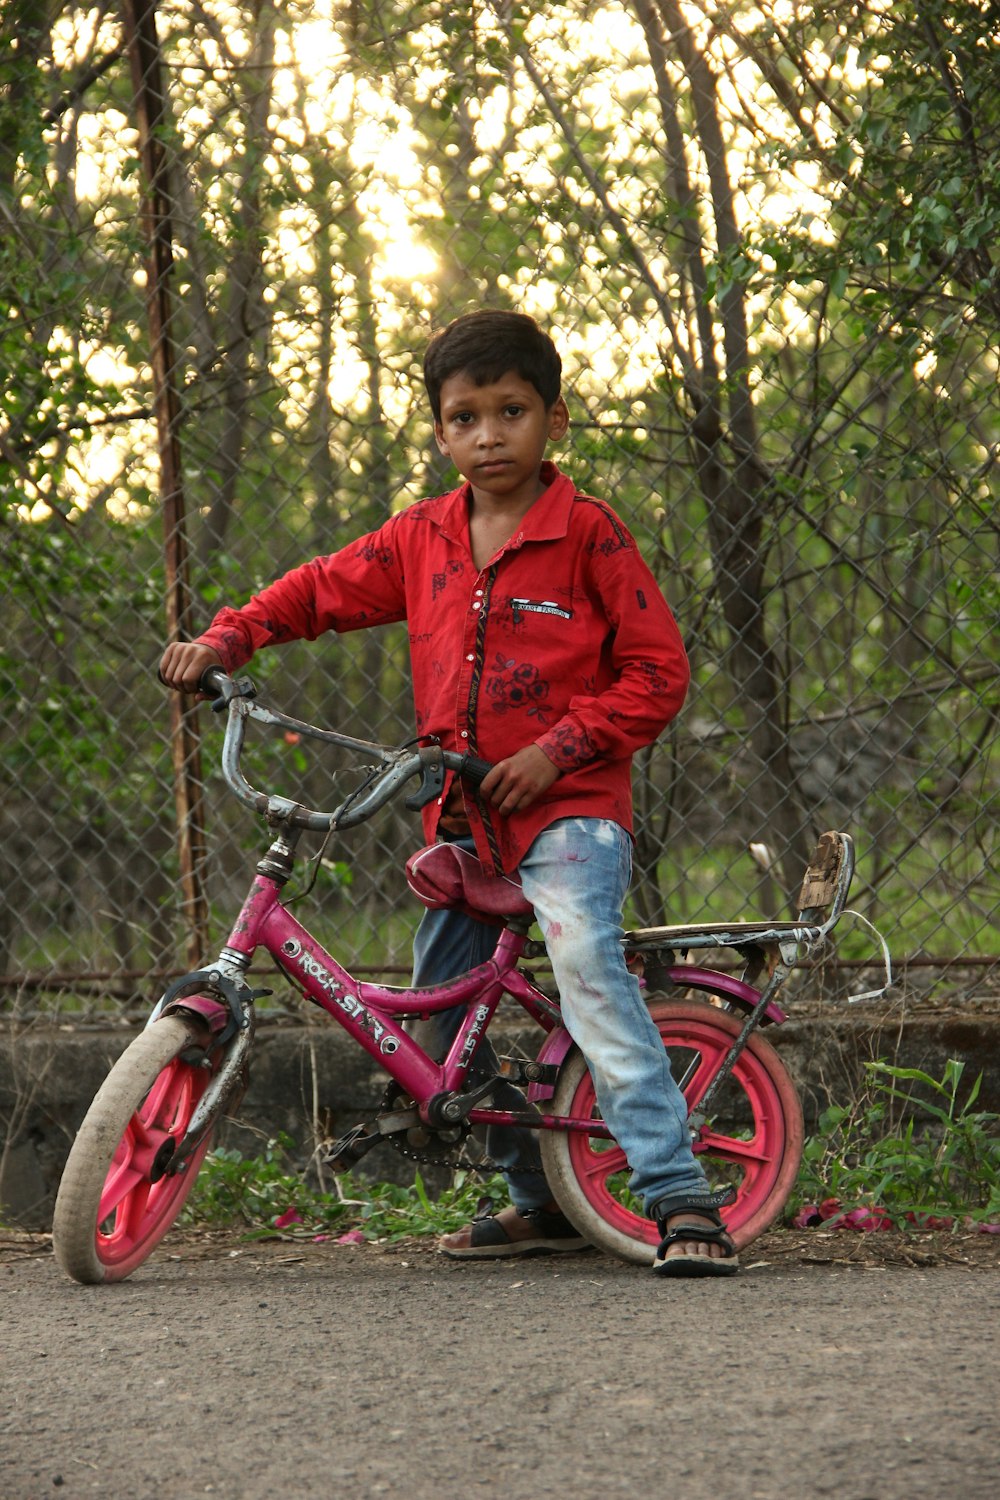 a young boy in a red shirt is riding a pink bike